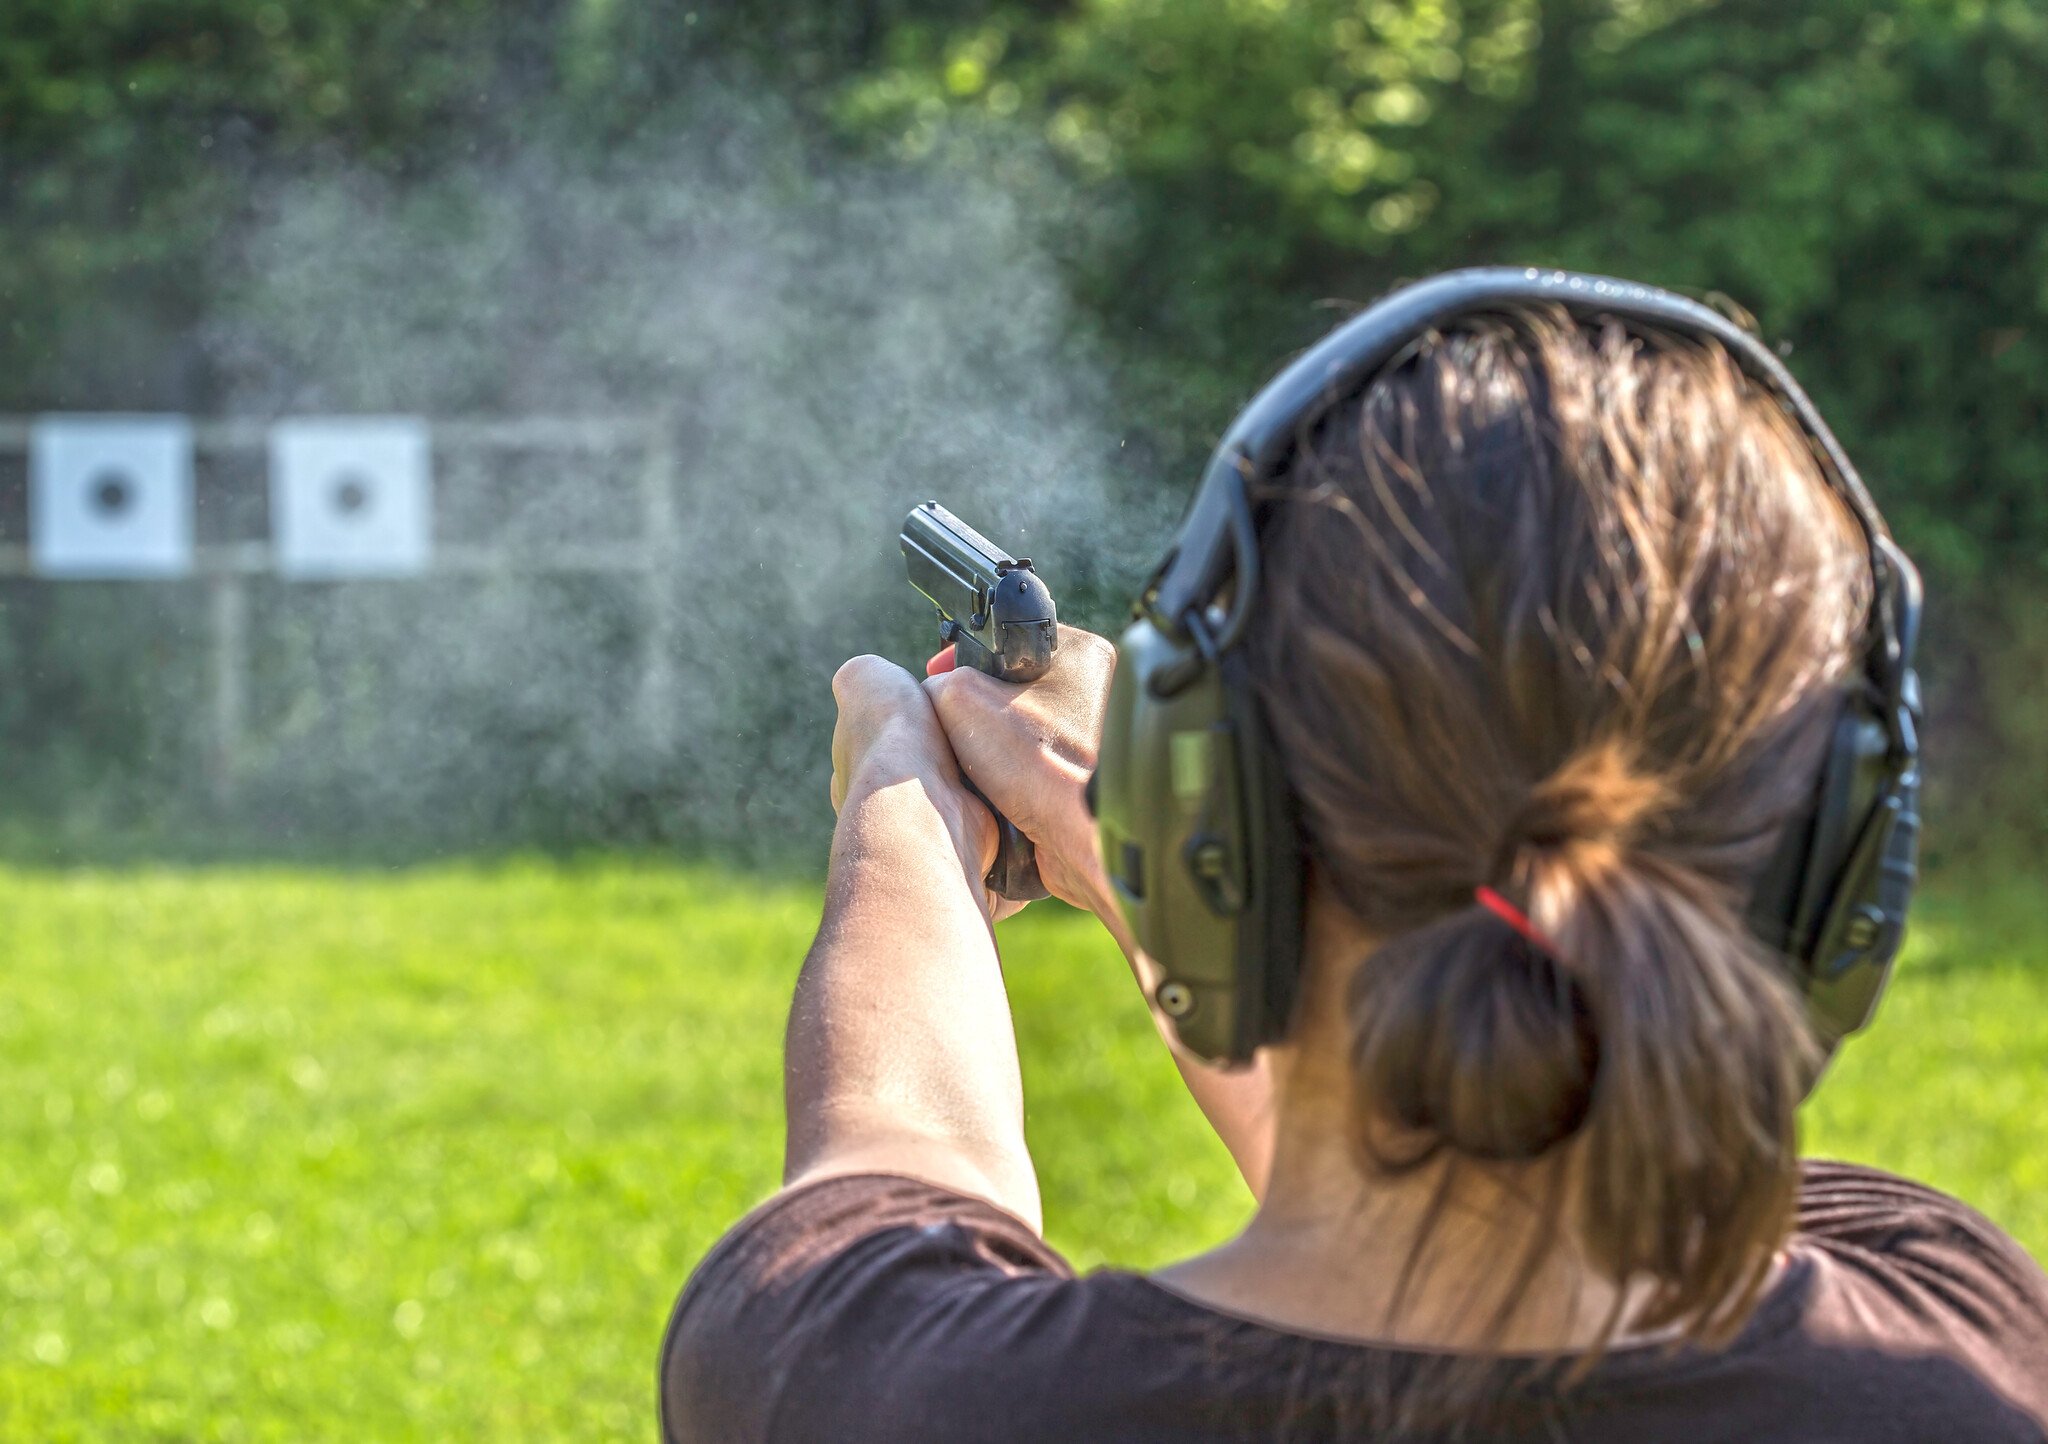 Finding the Perfect Handgun for Women: Let’s Get Real